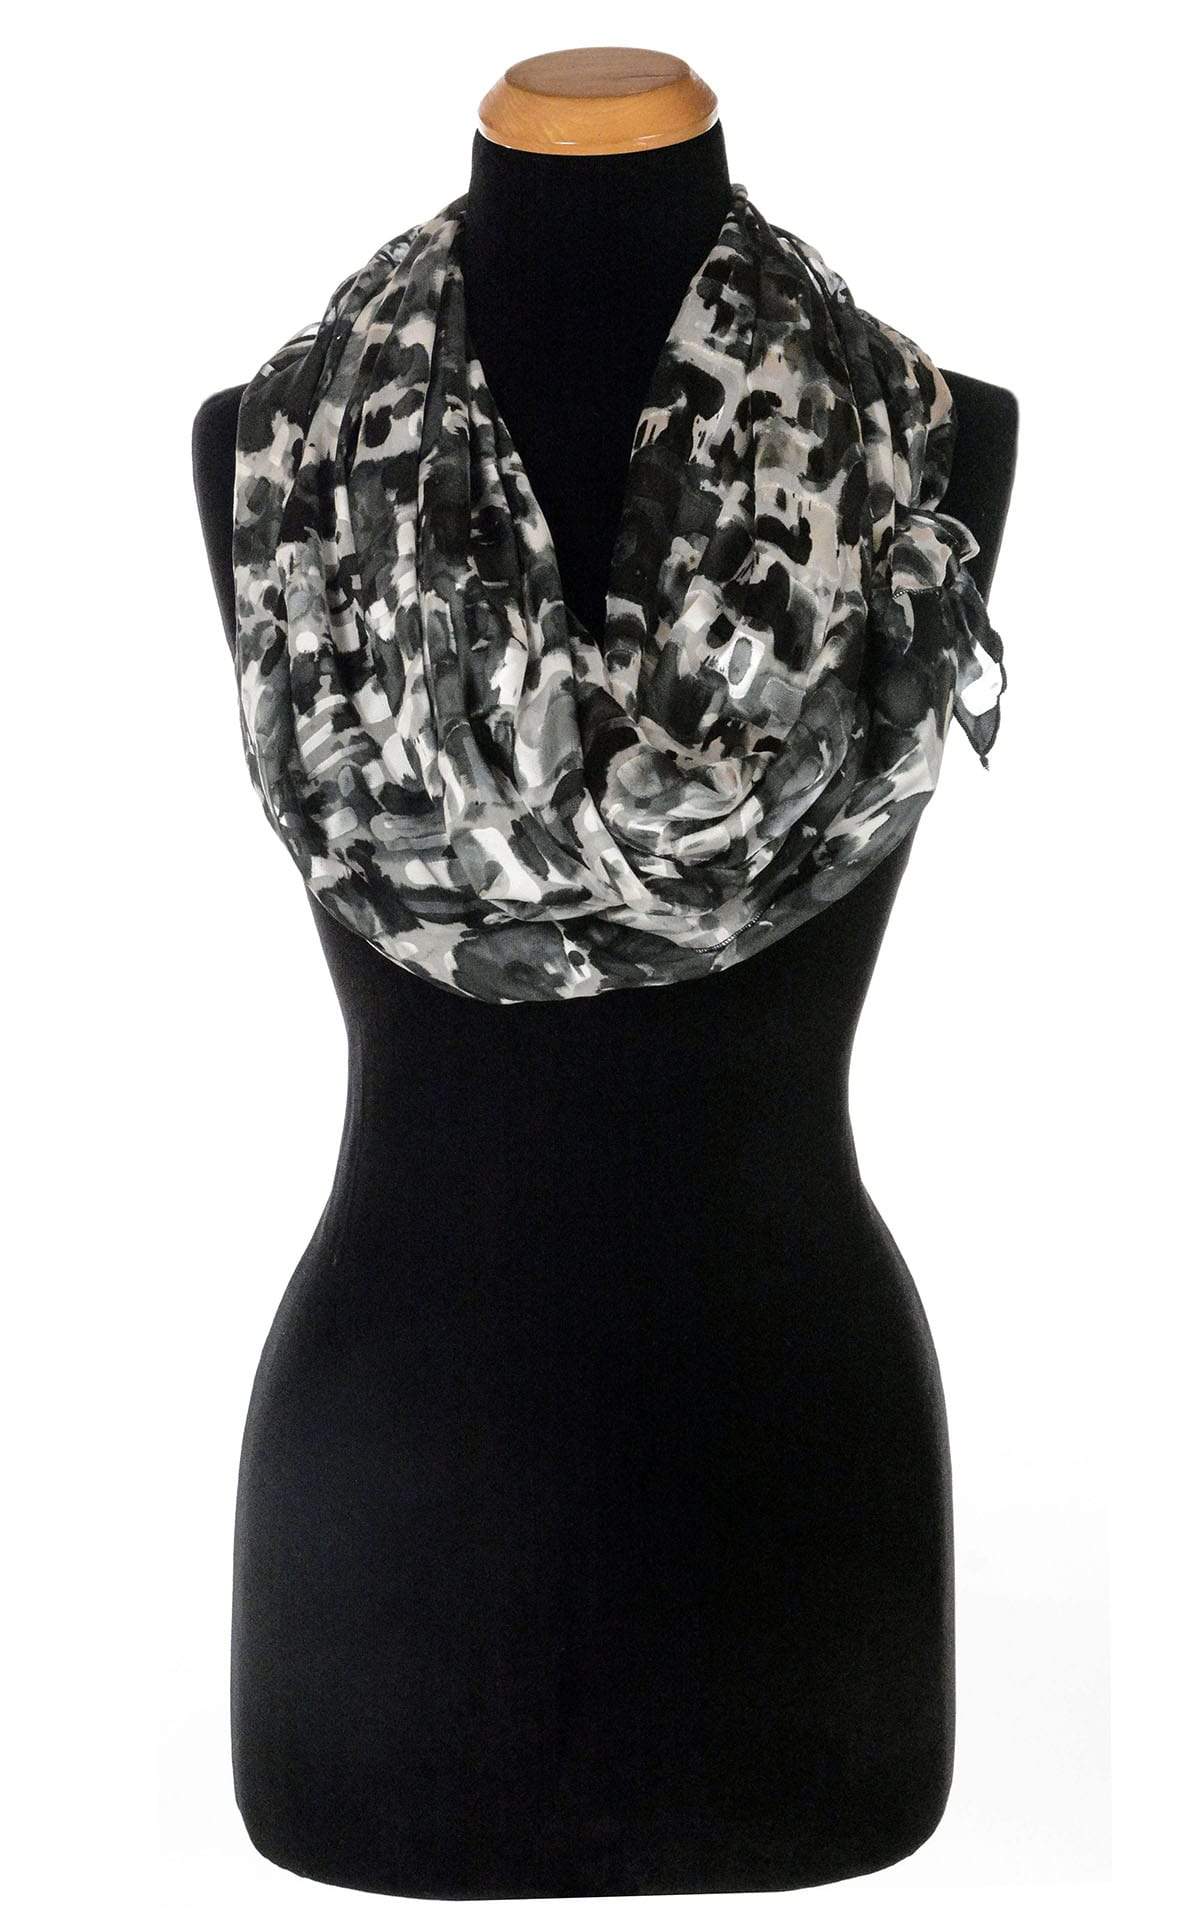 Ladies Large Handkerchief Scarf, Wrap in hand-painted silk on a mannequin wrapped twice | Garden Path in Sand Dollar black, Gray, and Ivory print | Handmade in Seattle WA | Pandemonium Millinery